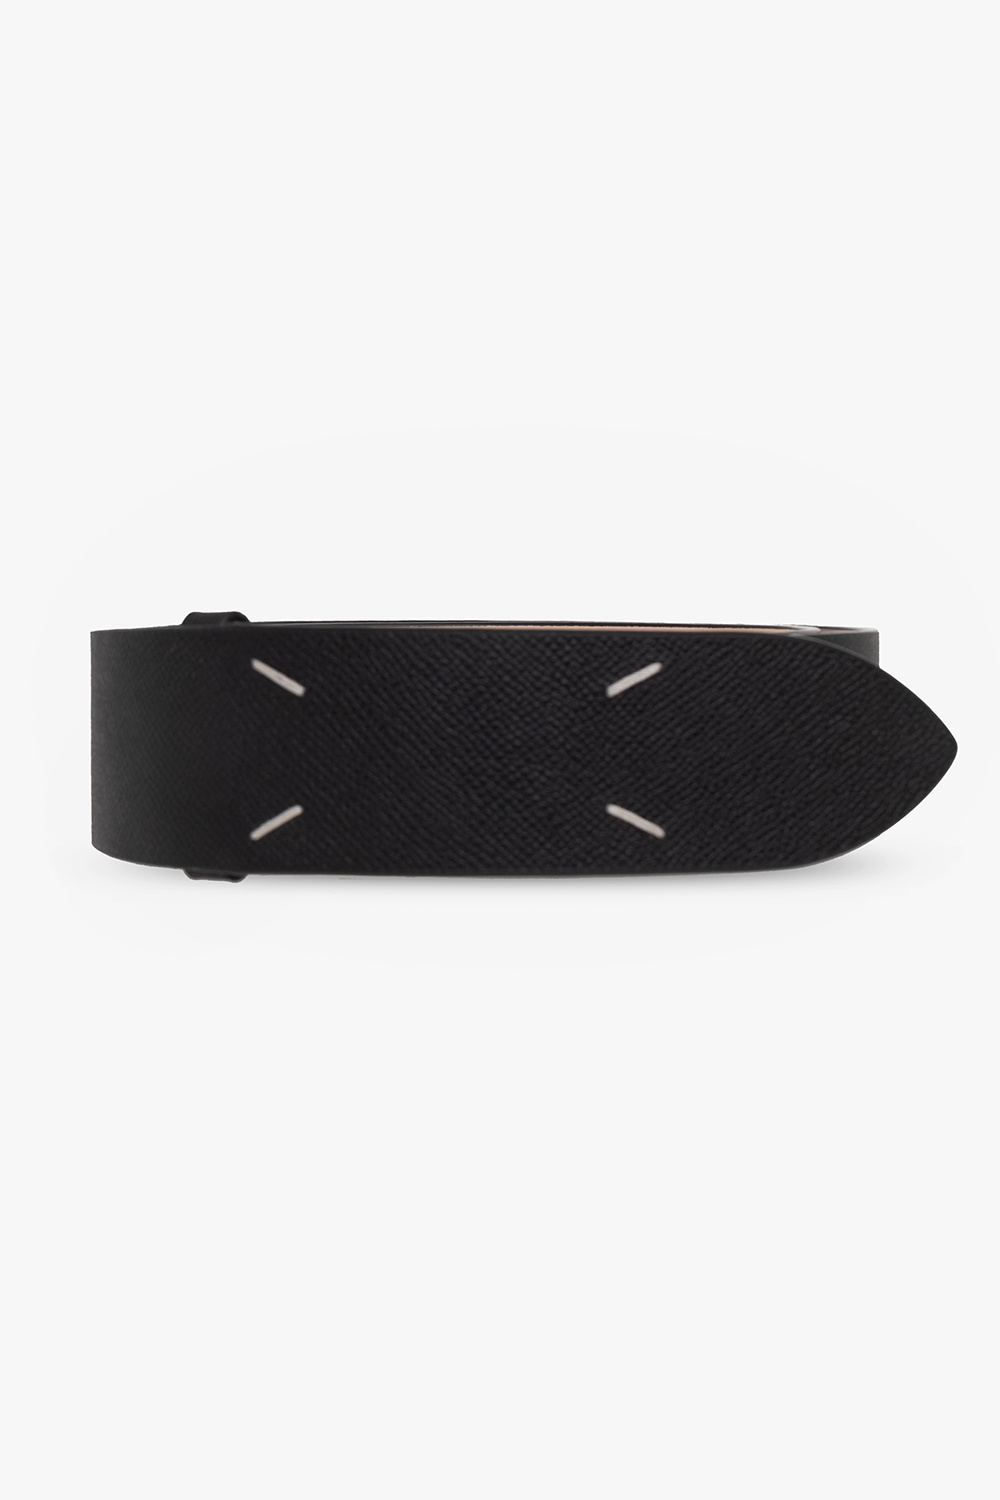 Maison Margiela Black belt from . Crafted from textured leather, this item features an embroidered white logo